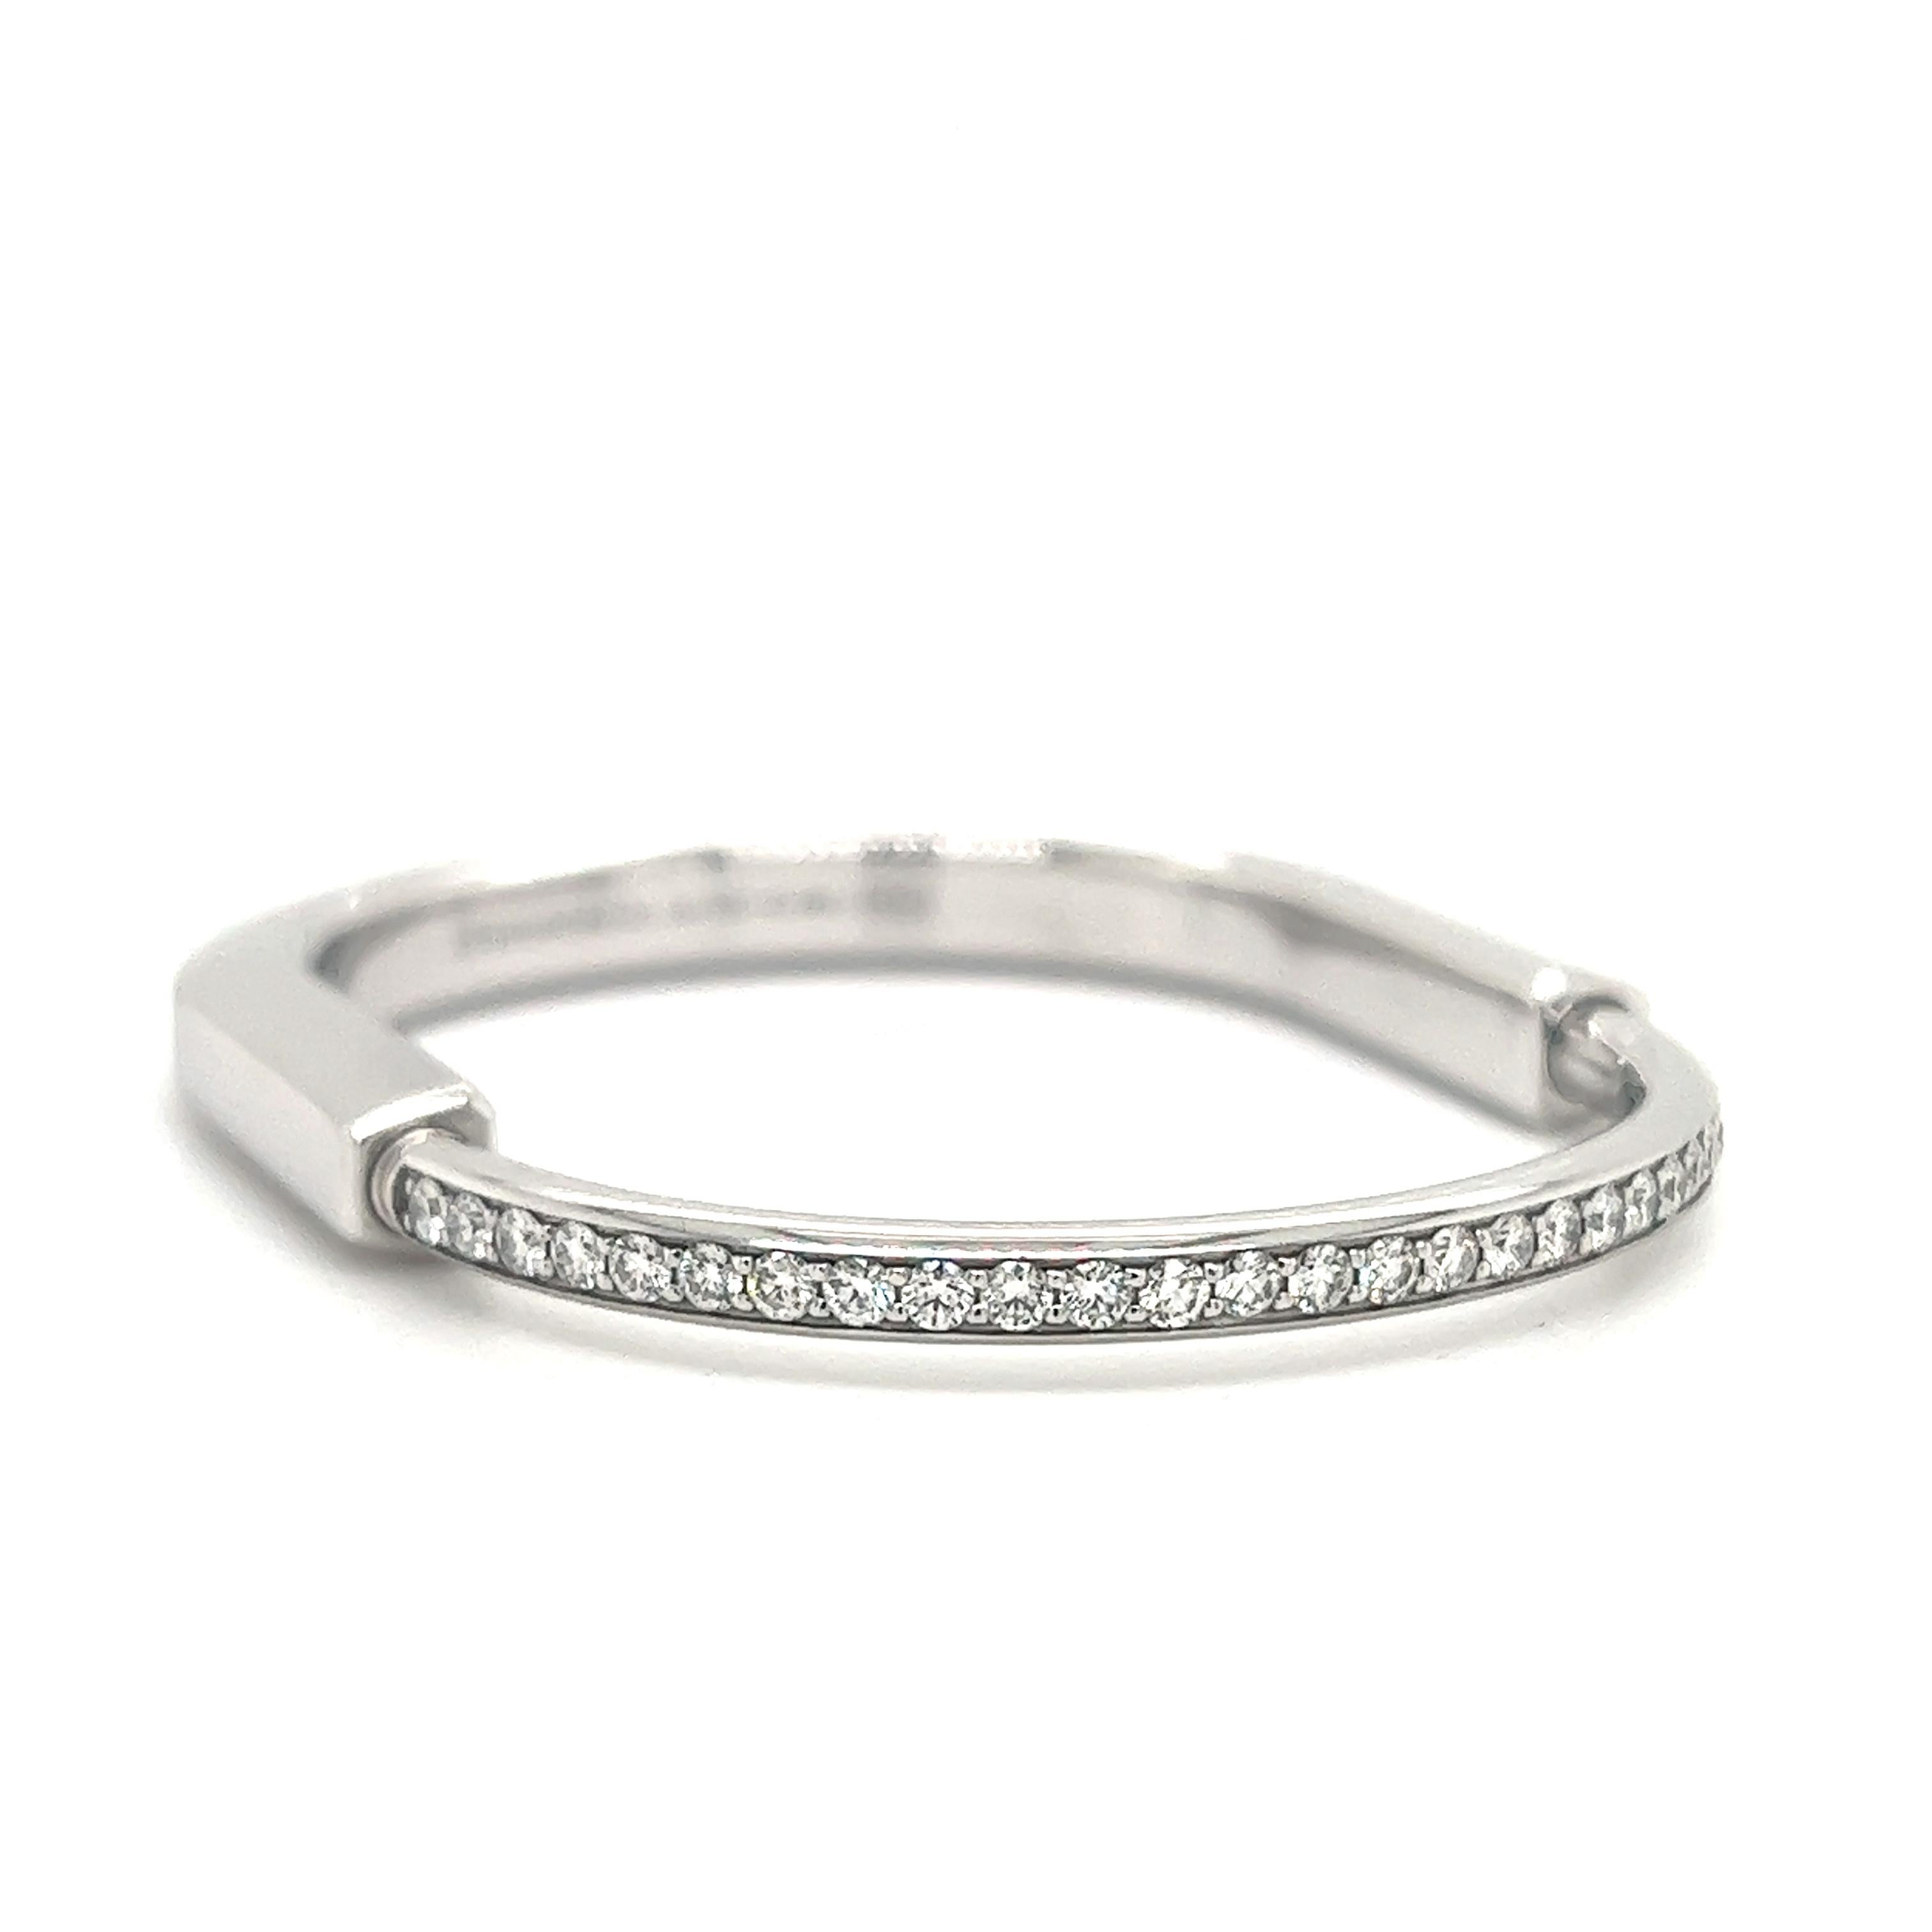 Beautiful new design from famed designer Tiffany  & Co. This design is known as the Tiffany & Co.  lock  bangle crafted in 18k white gold and set with 1.08 ct. natural diamonds. The bracelet is a size small and  will  fit a  5.75